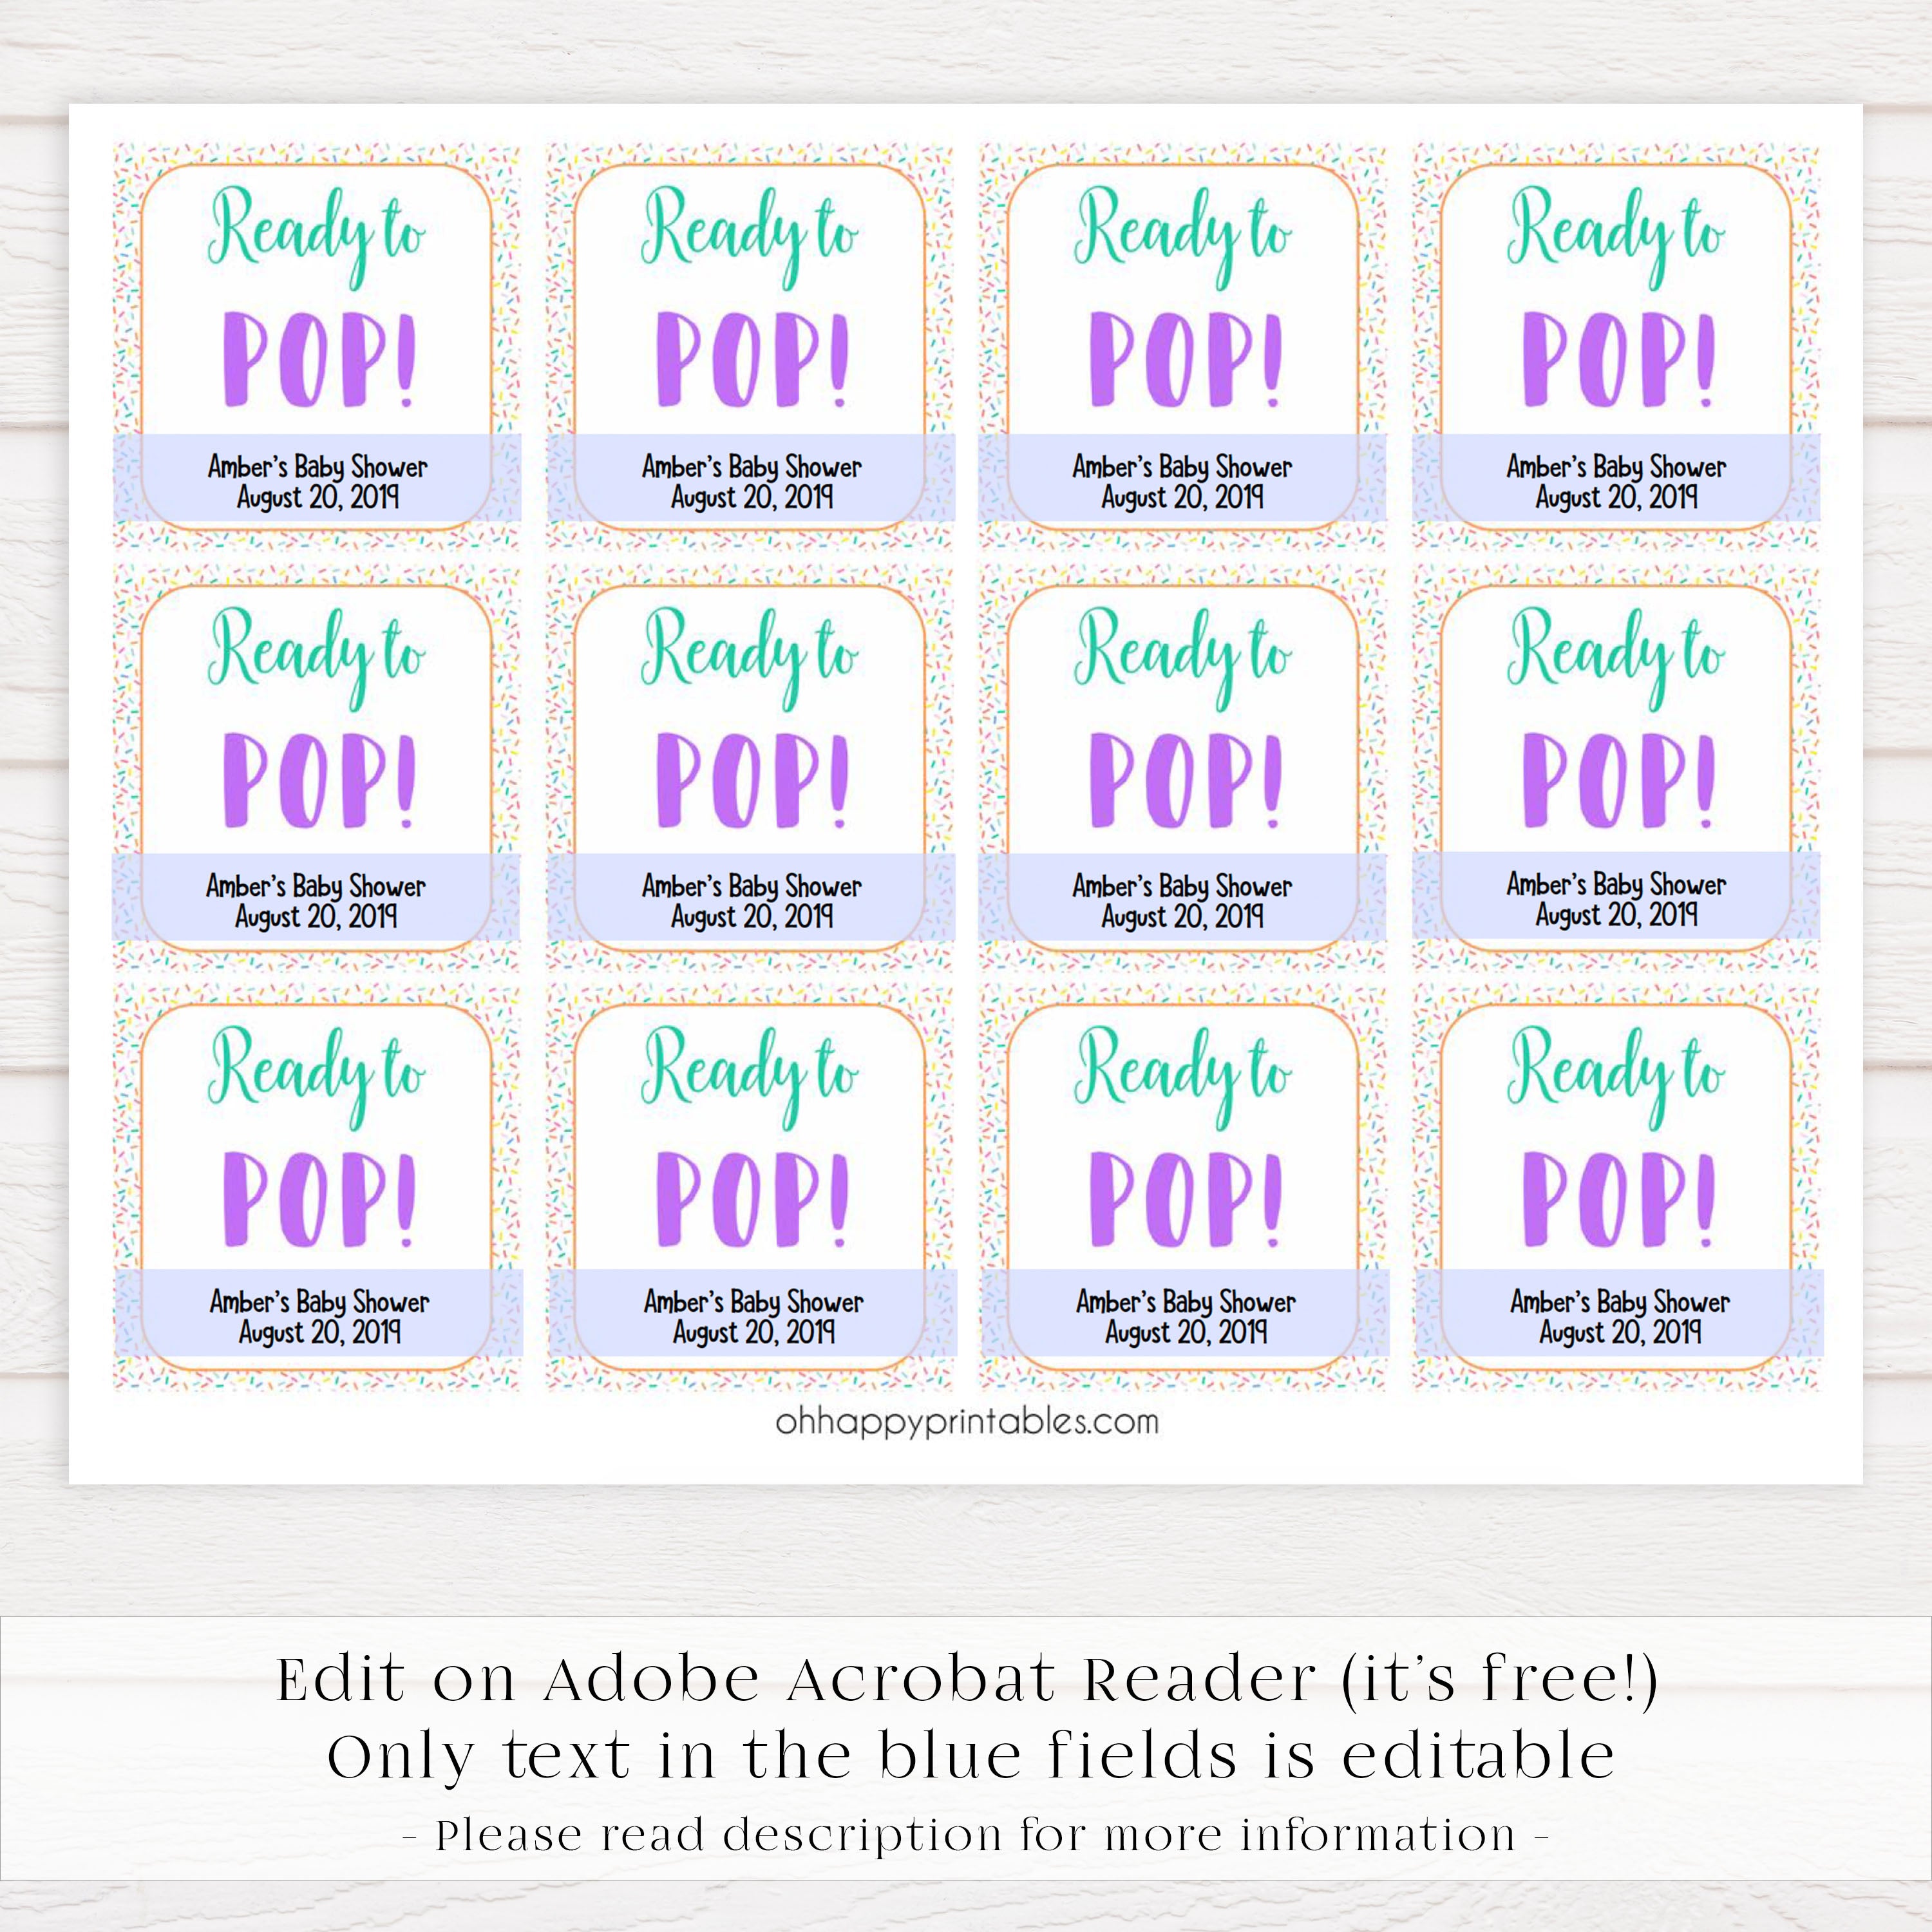 ready to pop tags, pop baby tags, Printable baby shower games, baby sprinkle fun baby games, baby shower games, fun baby shower ideas, top baby shower ideas, sprinkle shower baby shower, friends baby shower ideas